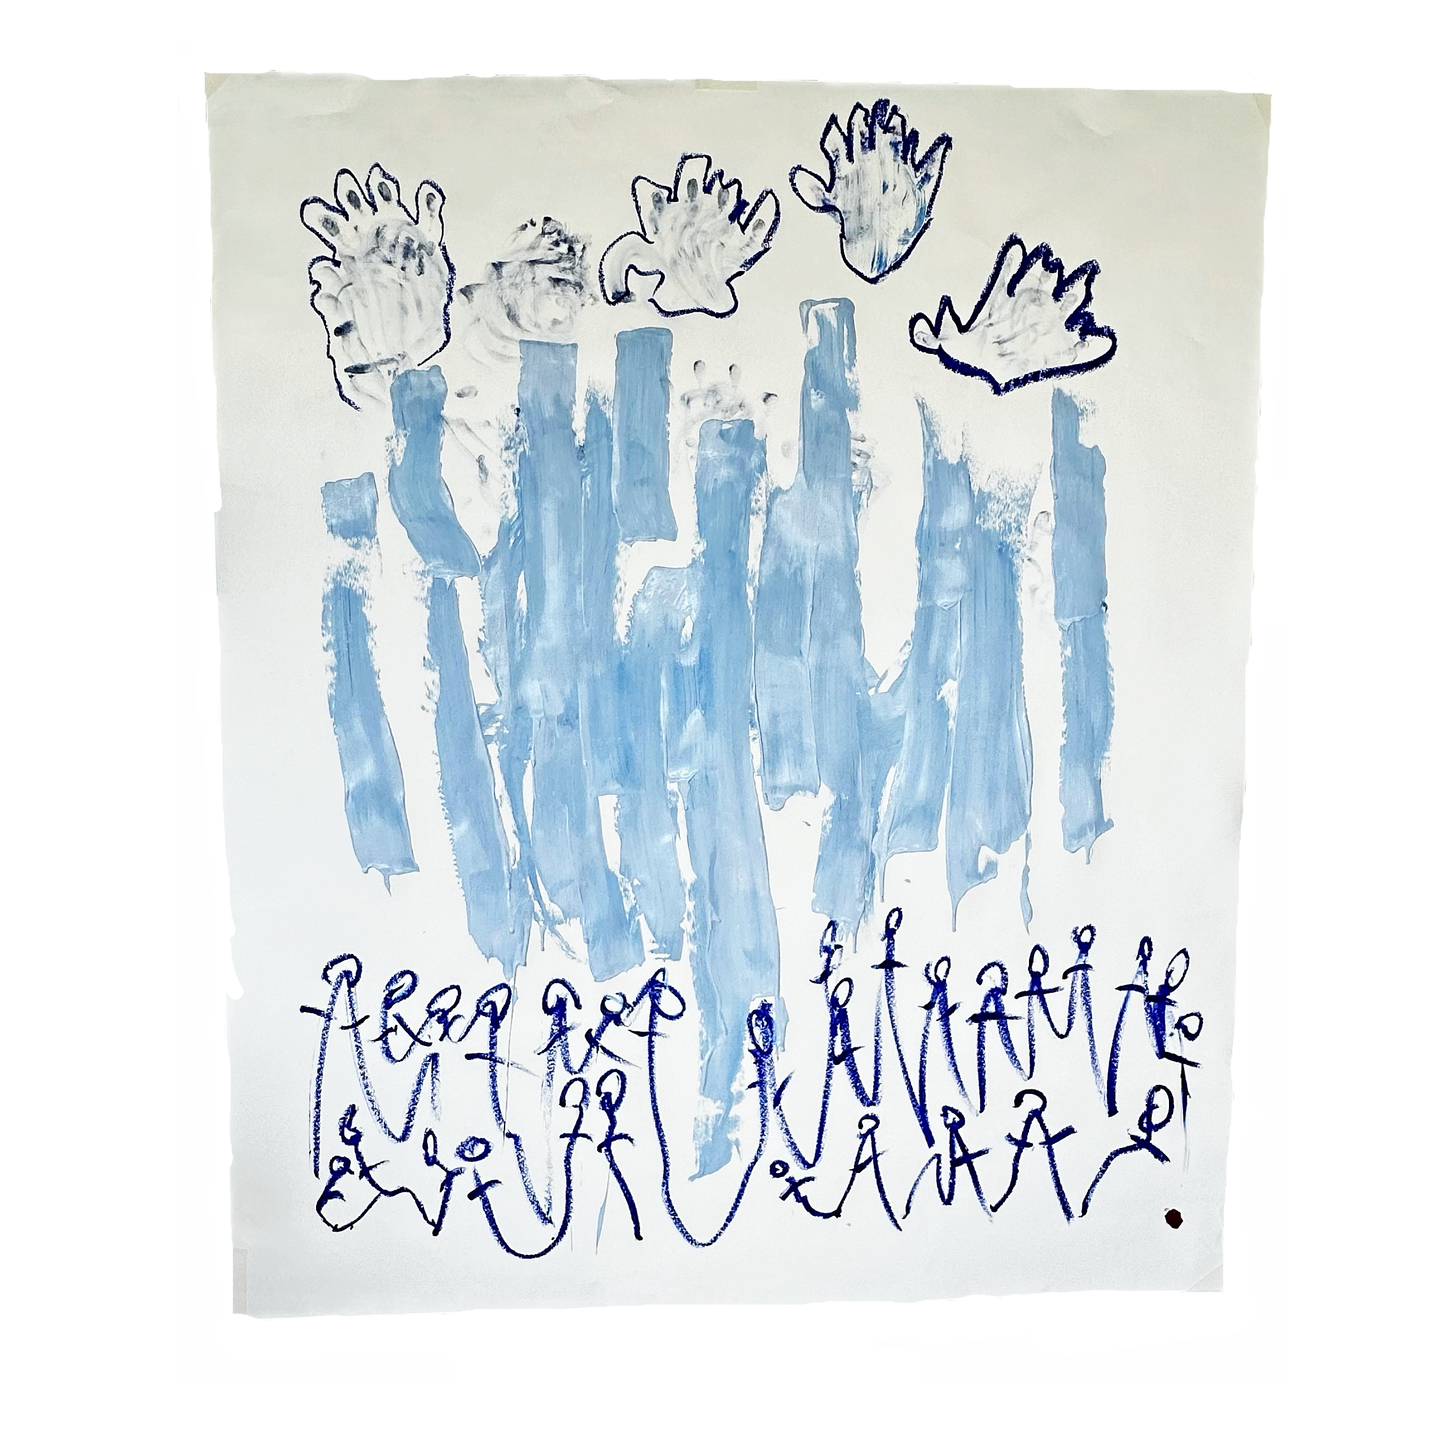 Abstract artwork featuring blue vertical brushstrokes on a white background, with the top resembling silhouettes of hands reaching upwards. Below the brushstrokes is a line of stylized figures drawn in blue, connected by loops, suggesting a sense of community or continuity. The figures and loops have a playful, child-like quality, reminiscent of stick figure drawings.